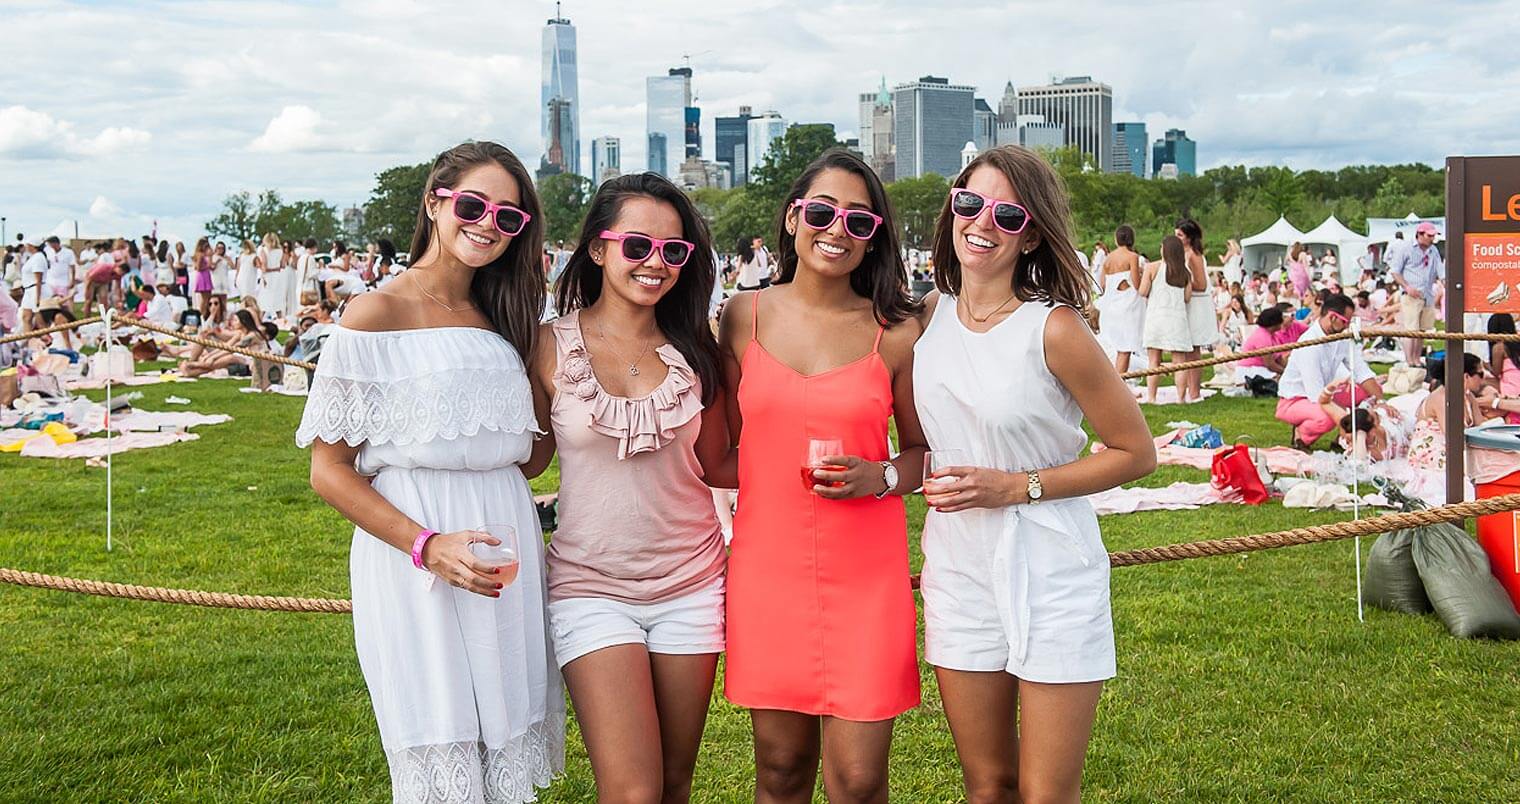 Rosé-Themed Picnic and Music Festival Blankets Governors Island, featured image